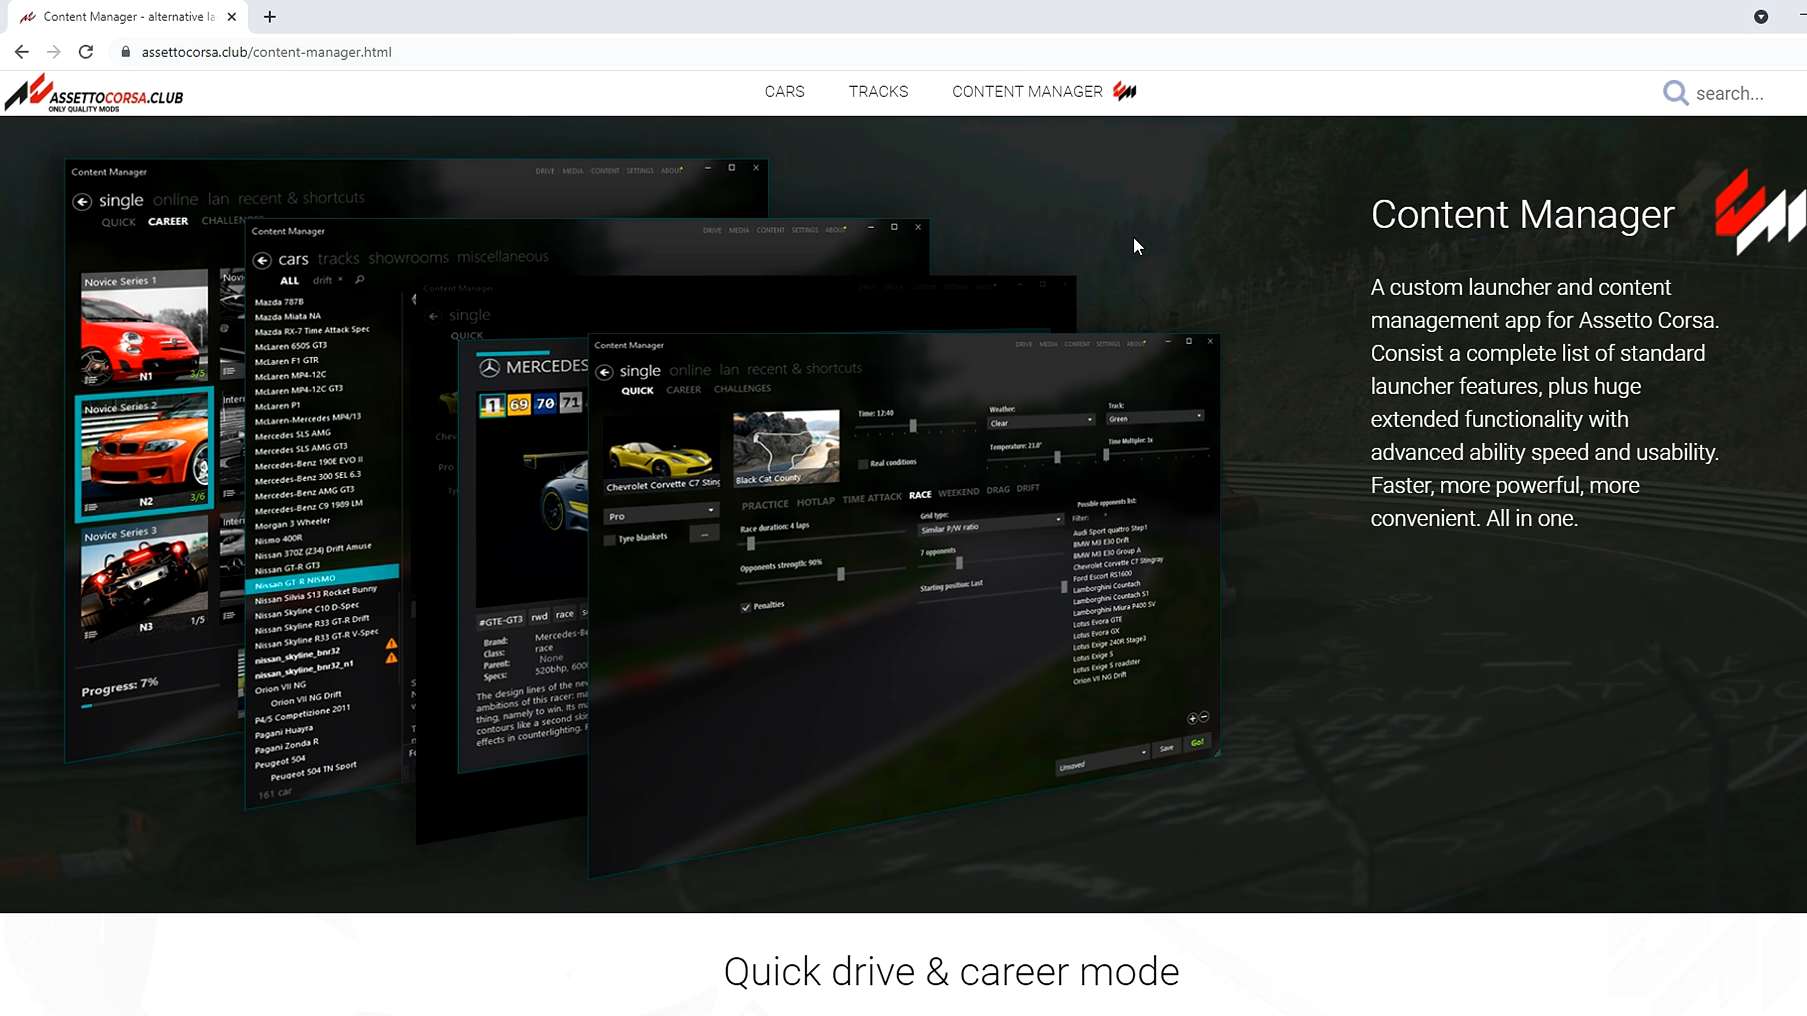 This guide will tell you how to install mods in Assetto Corsa. Go through the guide and follow the step-by-step instructions to install the mods. 